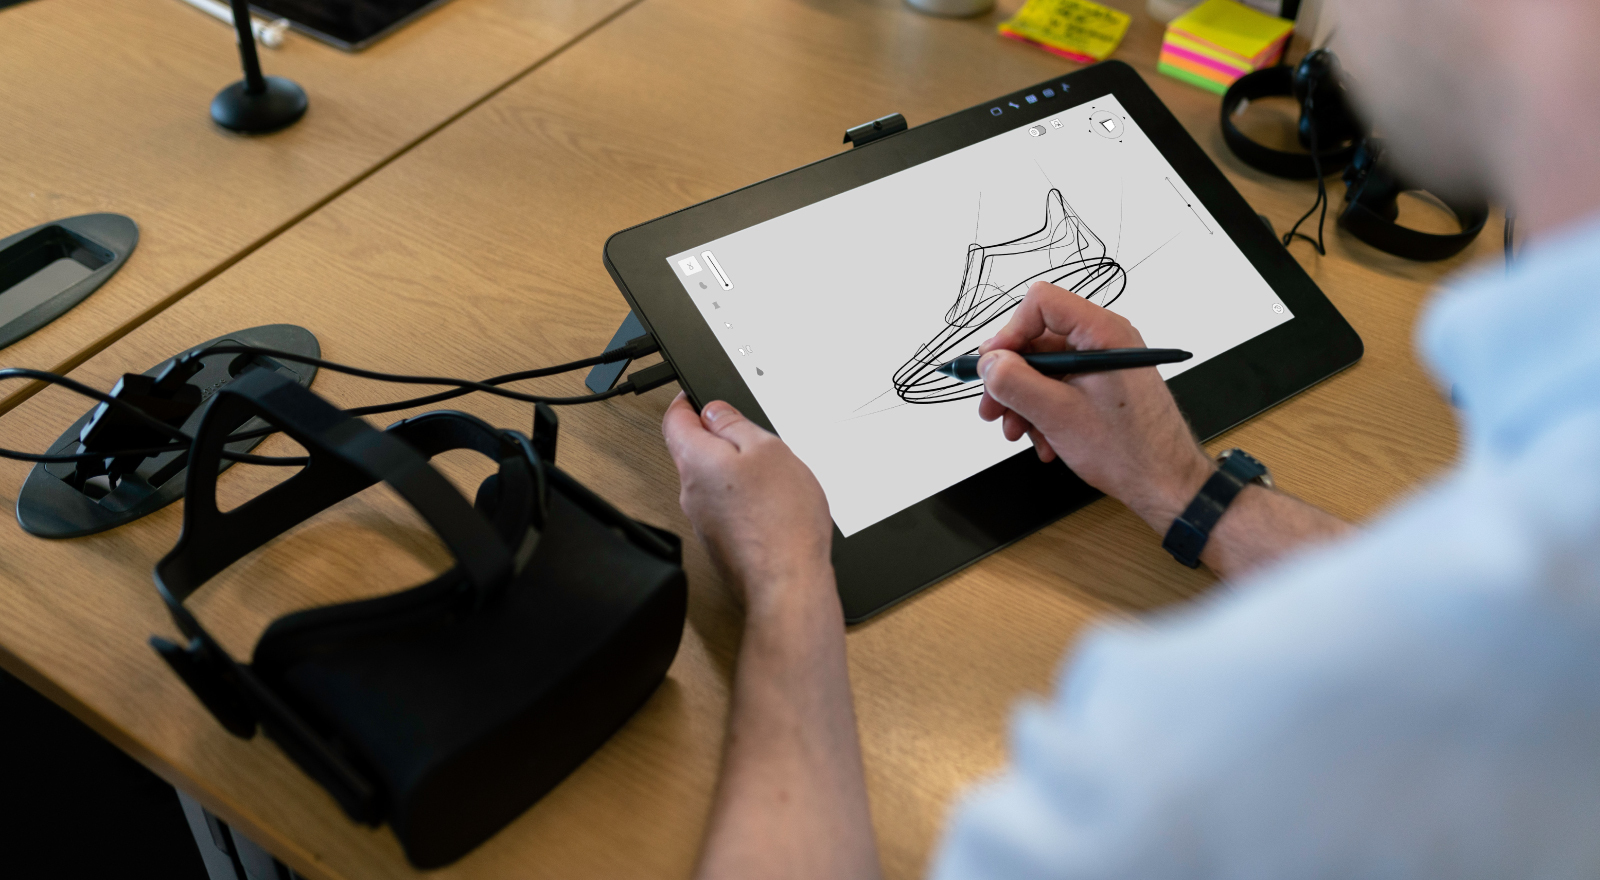 The importance of user-centered design in augmented reality applications